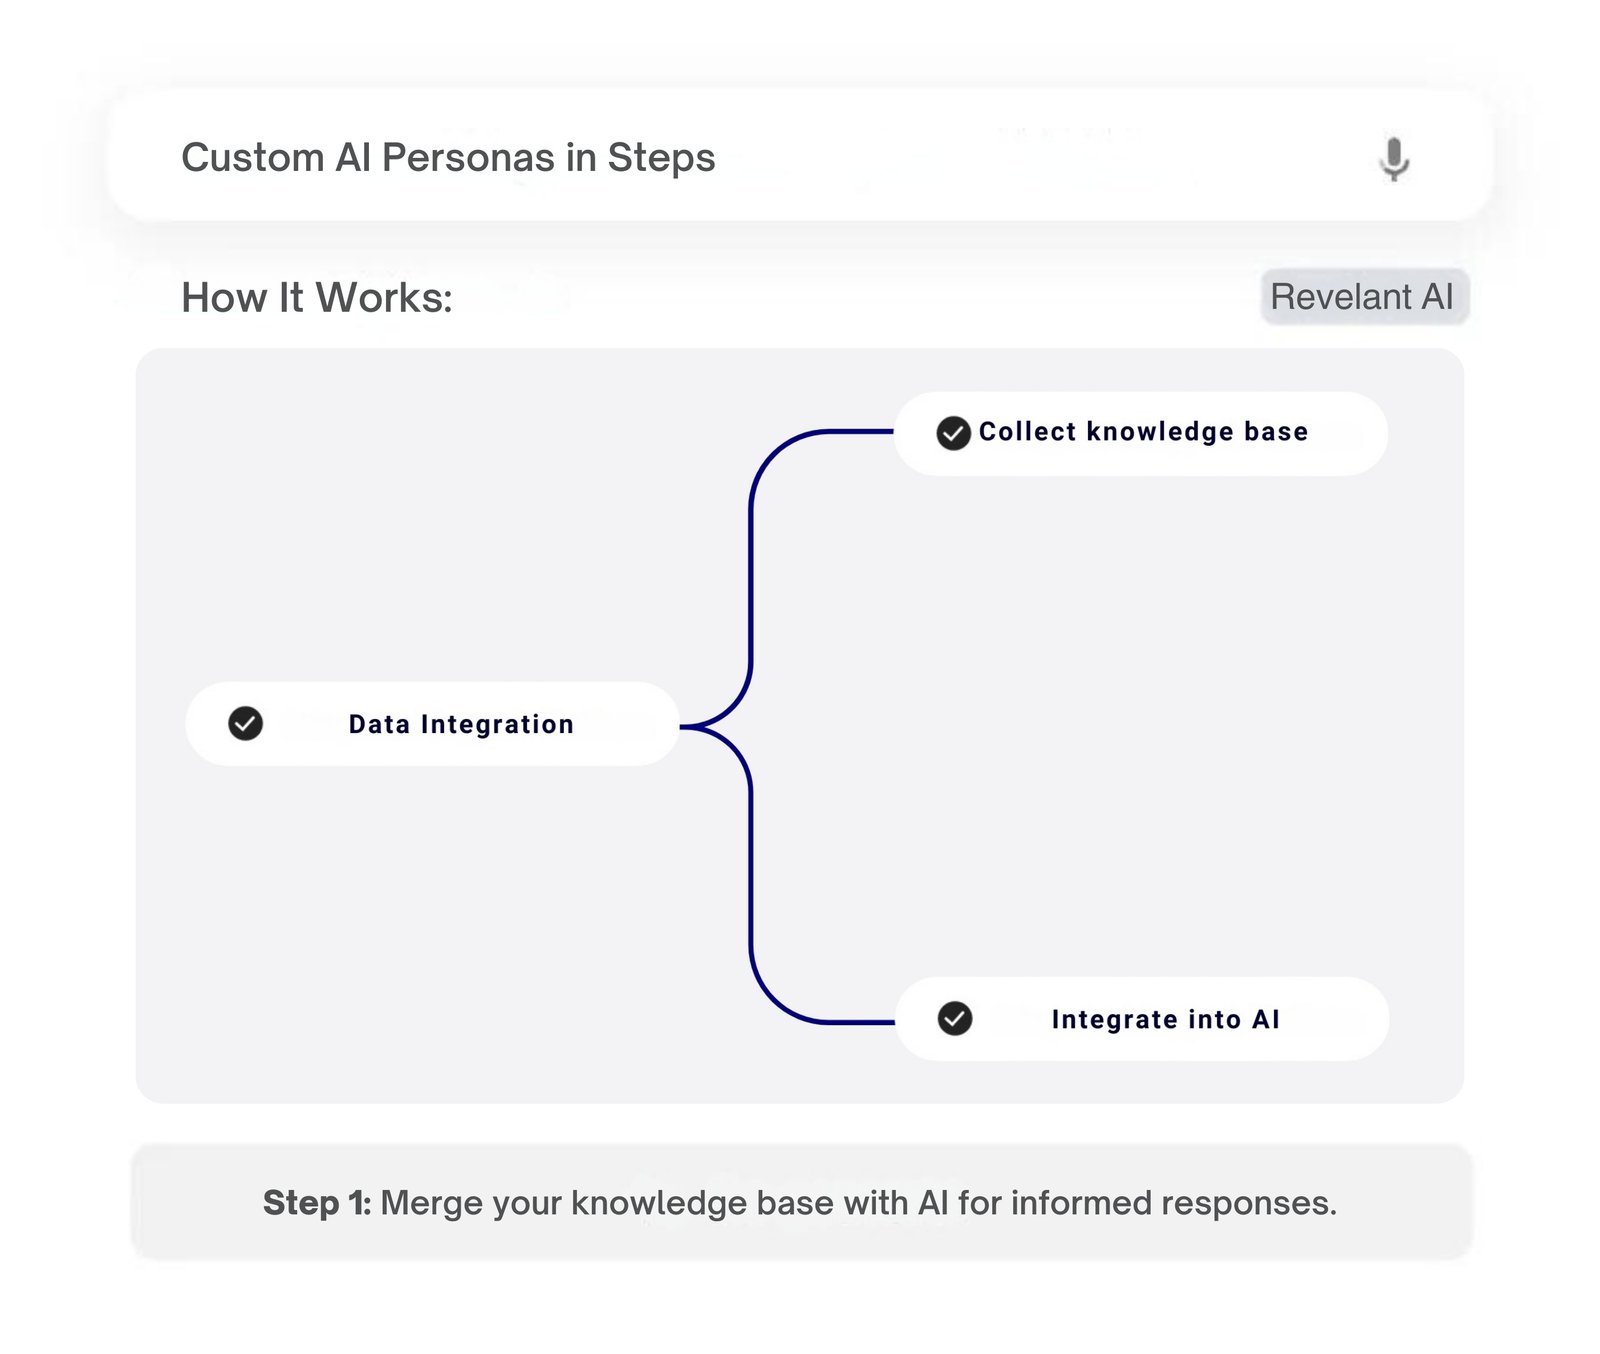 Infographic showing step 1 of creating custom AI personas with data integration, including knowledge base collection and AI integration.